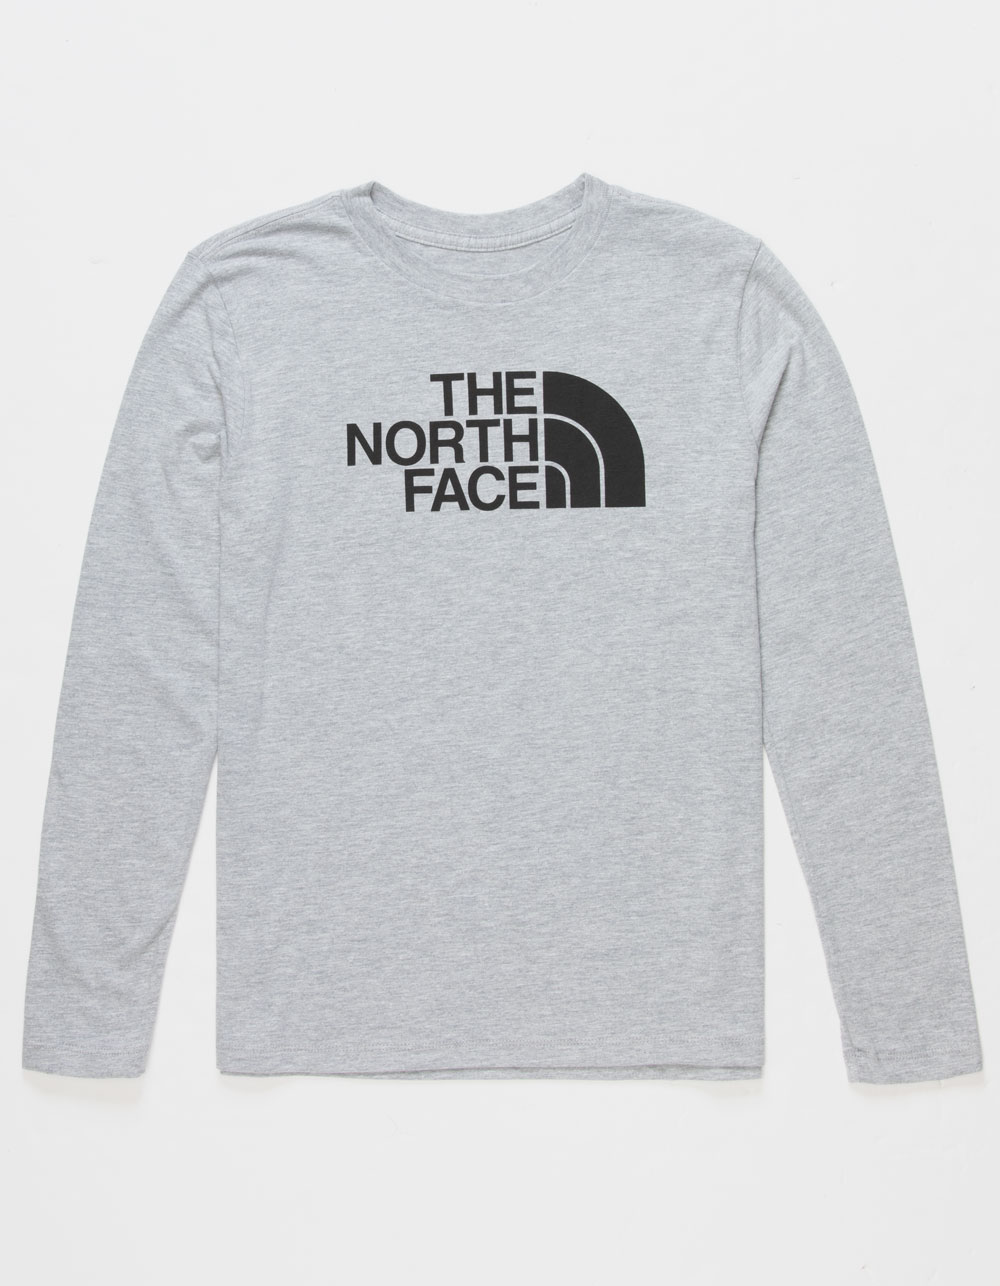 THE NORTH FACE Graphic Boys Long Sleeve Tee - LIGHT GRAY | Tillys